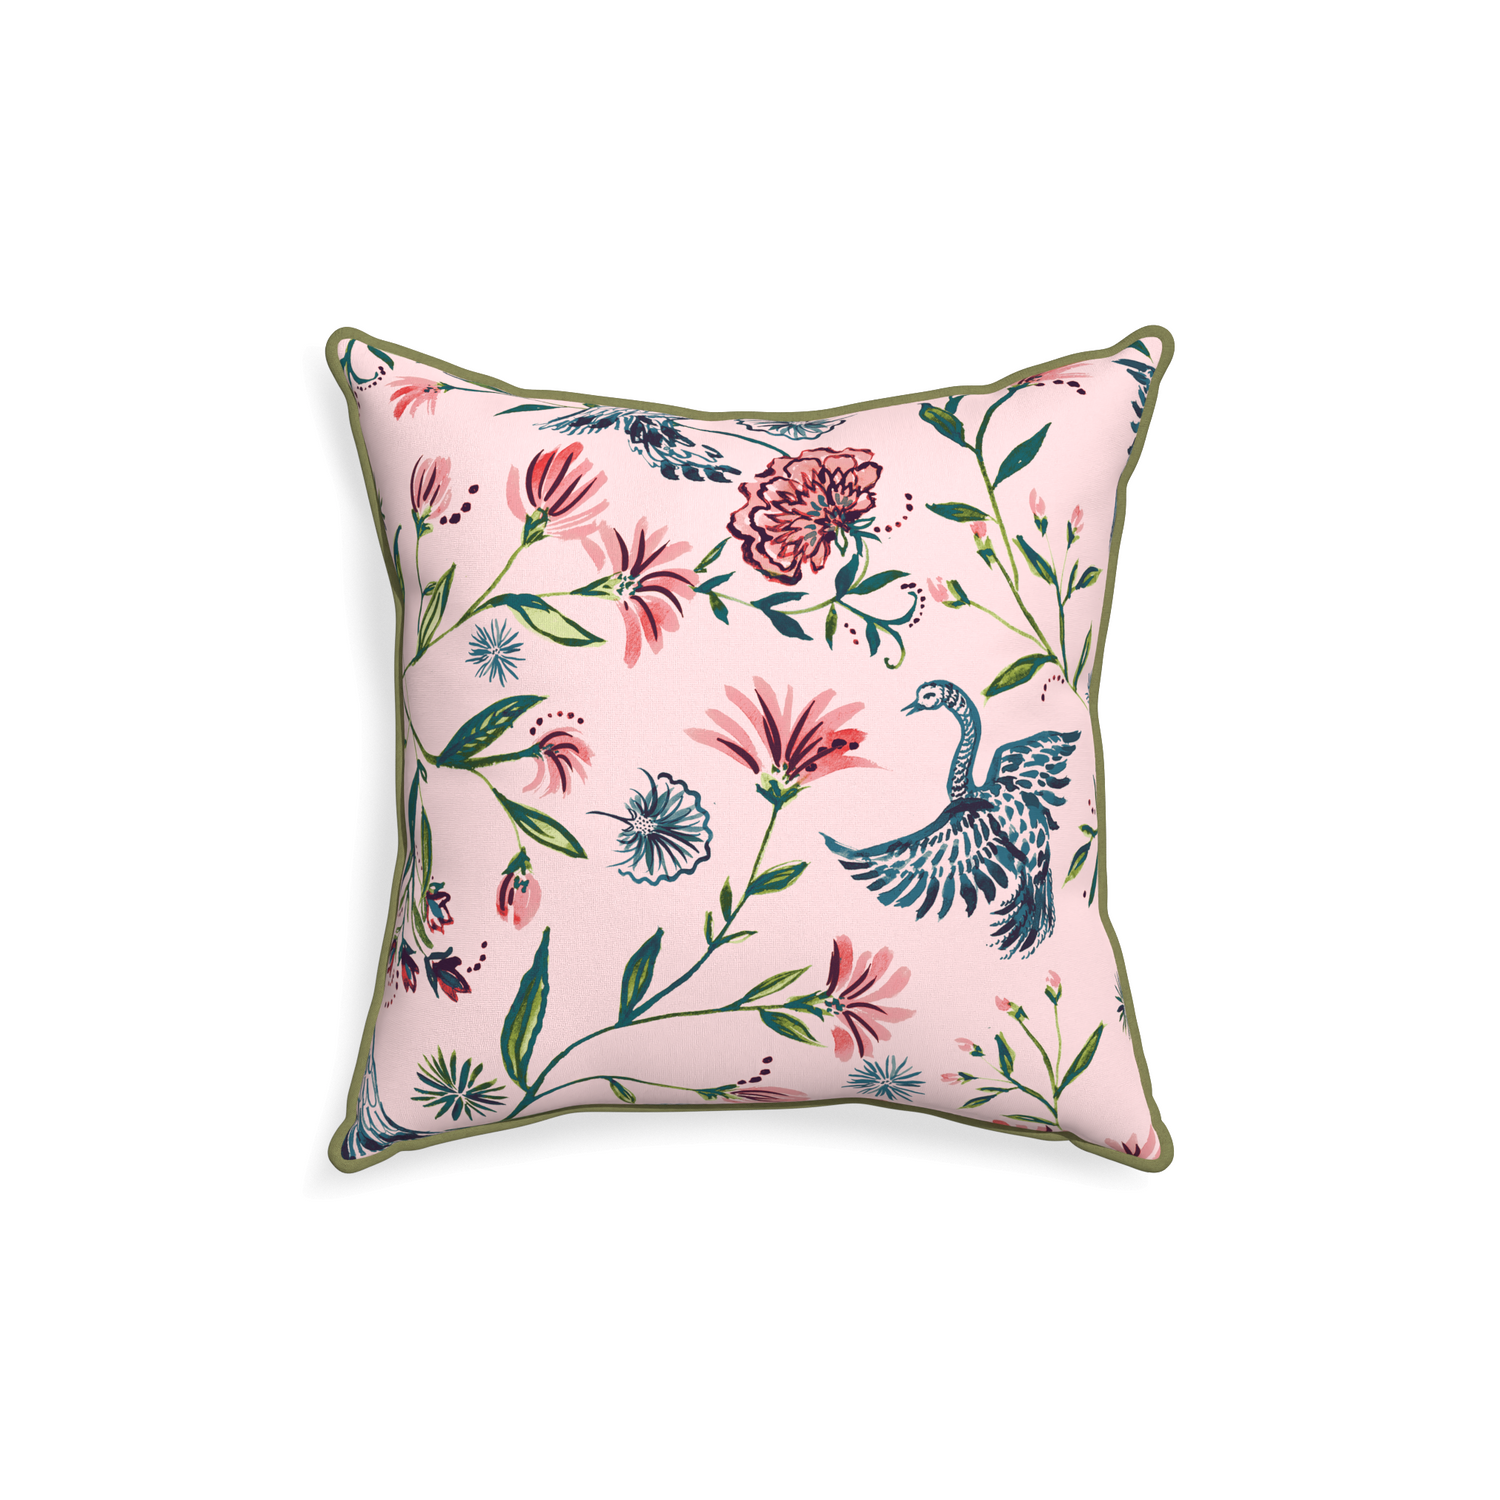 18-square daphne rose custom pillow with moss piping on white background